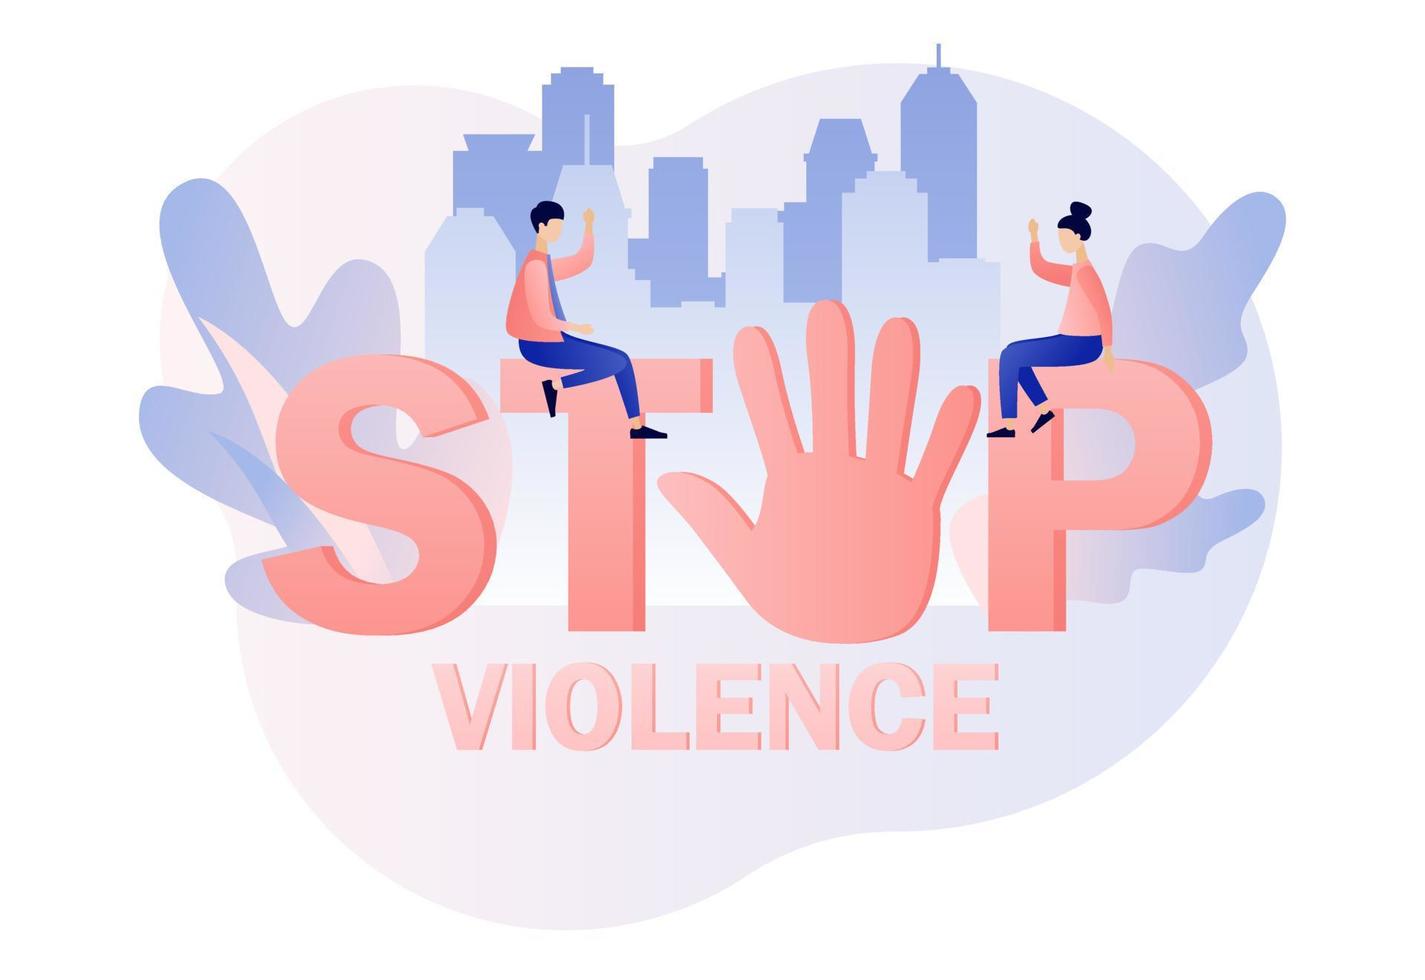 Stop violence big text. International day for the elimination of violence against women. Modern flat cartoon style. Vector illustration on white background